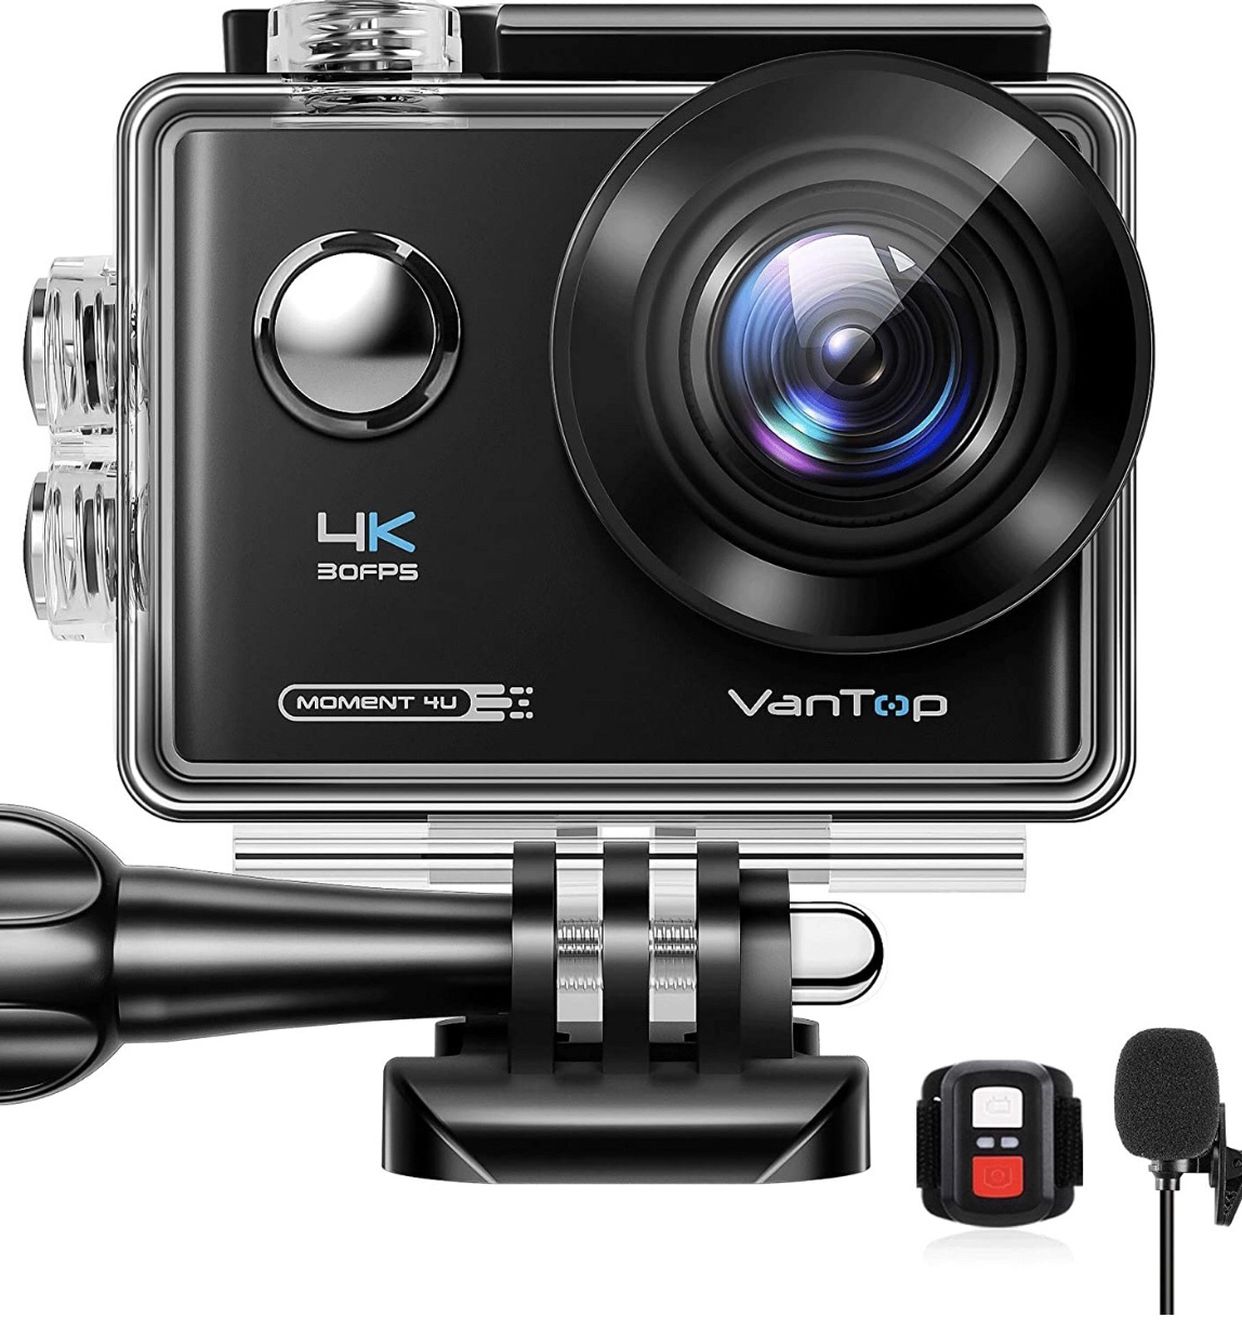 VanTop Moment 4U 4K Action Camera 20MP Underwater Waterproof Camera with EIS, External Microphone, Touch Screen, Slow Motion, 170° Wide Angle Sports C